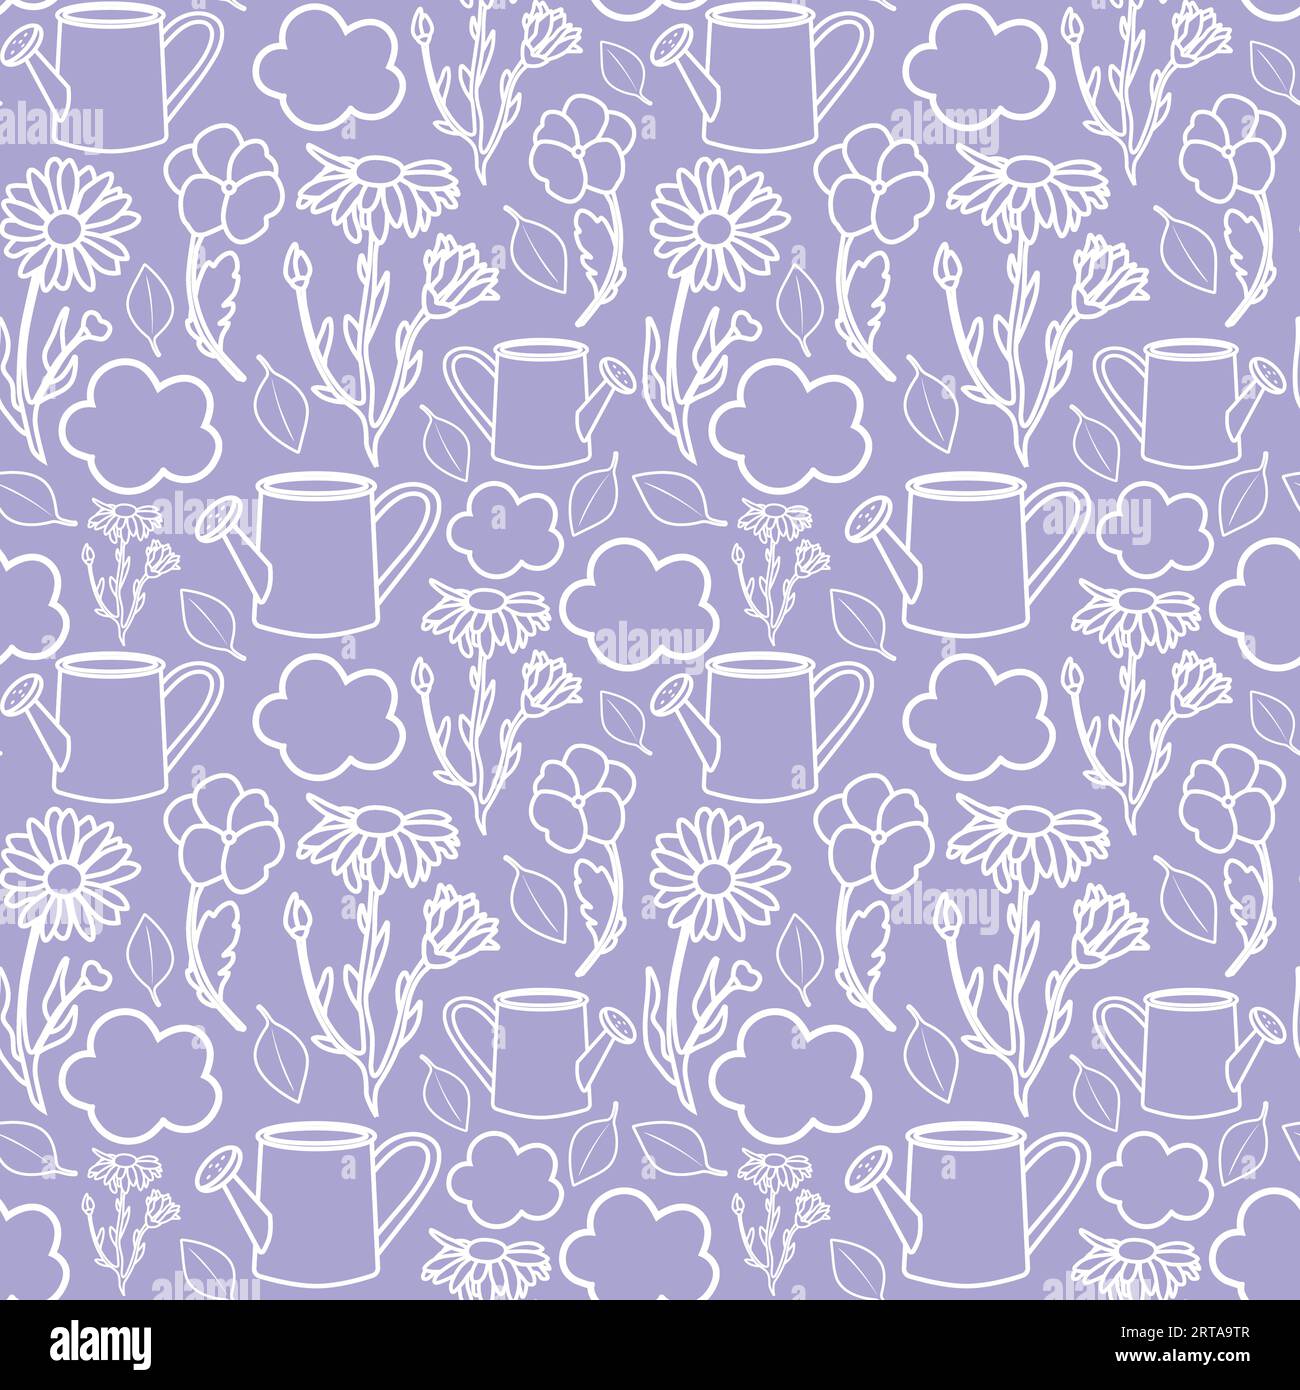 Seamless pattern with vector garden elements Stock Photo